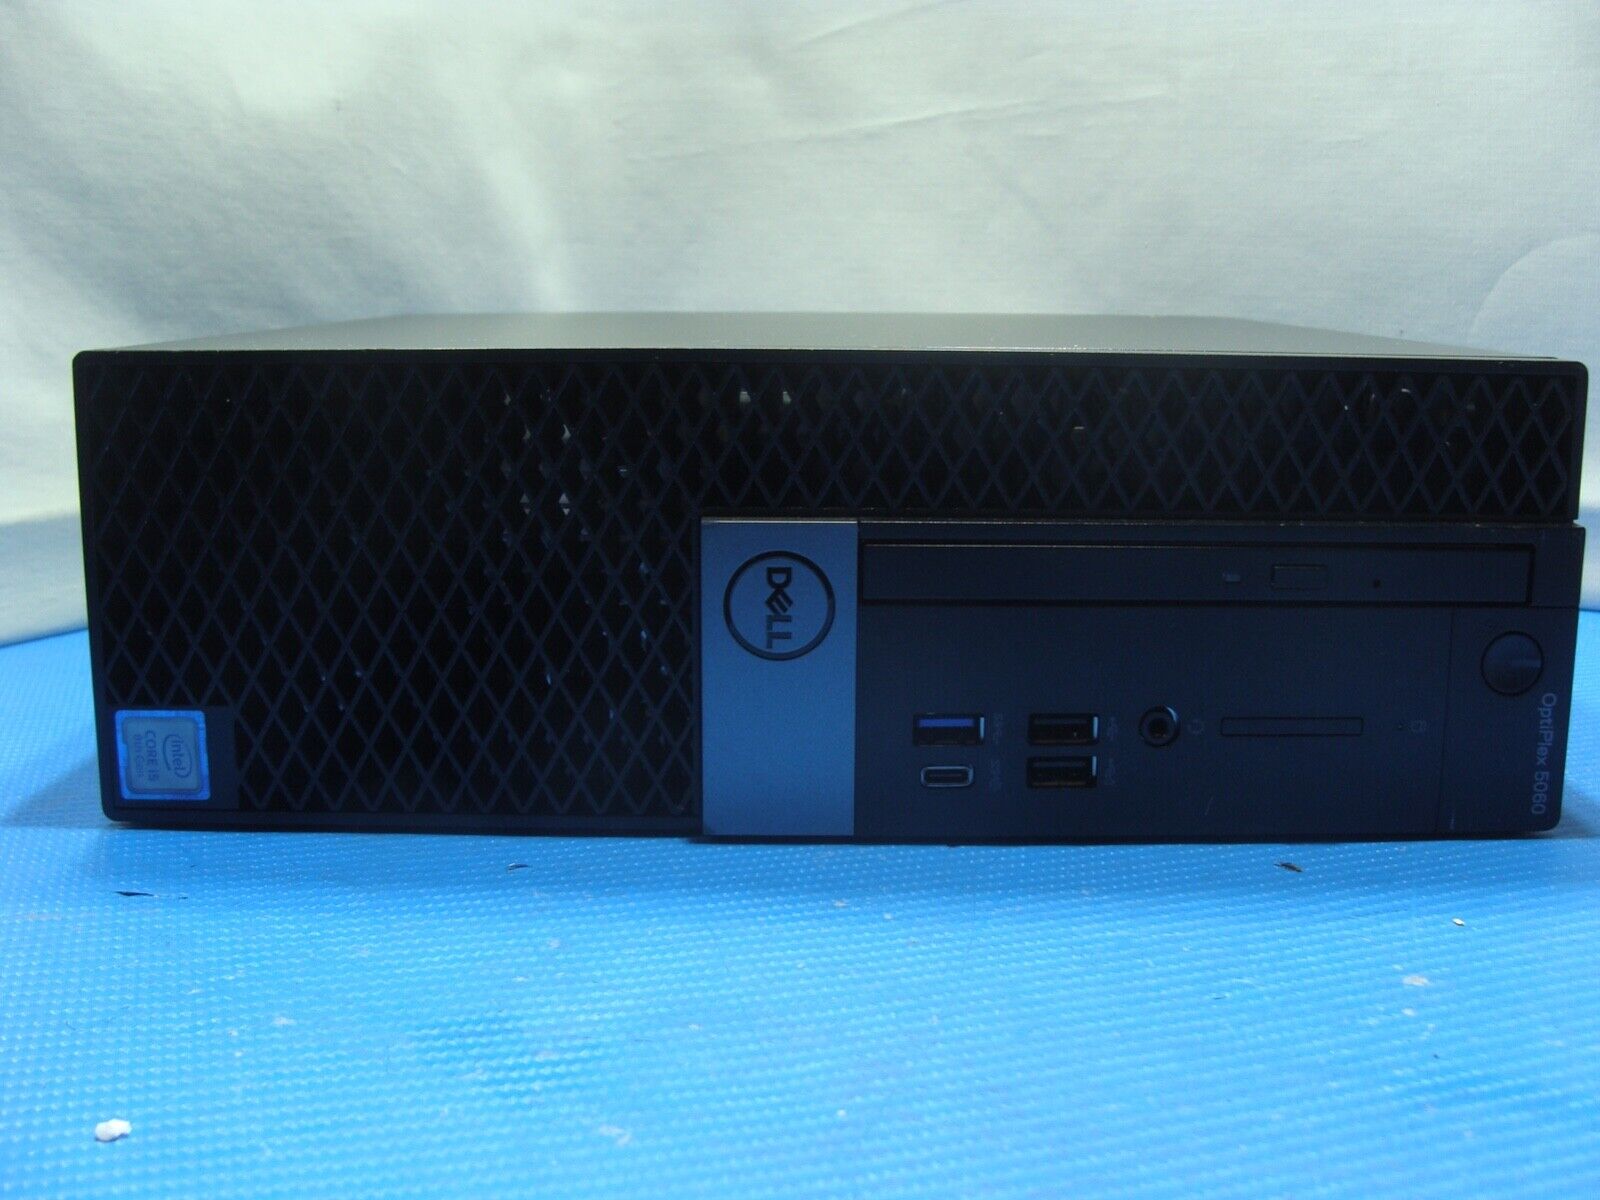 Reliable Powerful Dell Optiplex 5060 Tower Intel i7-8700 3.2 16GB